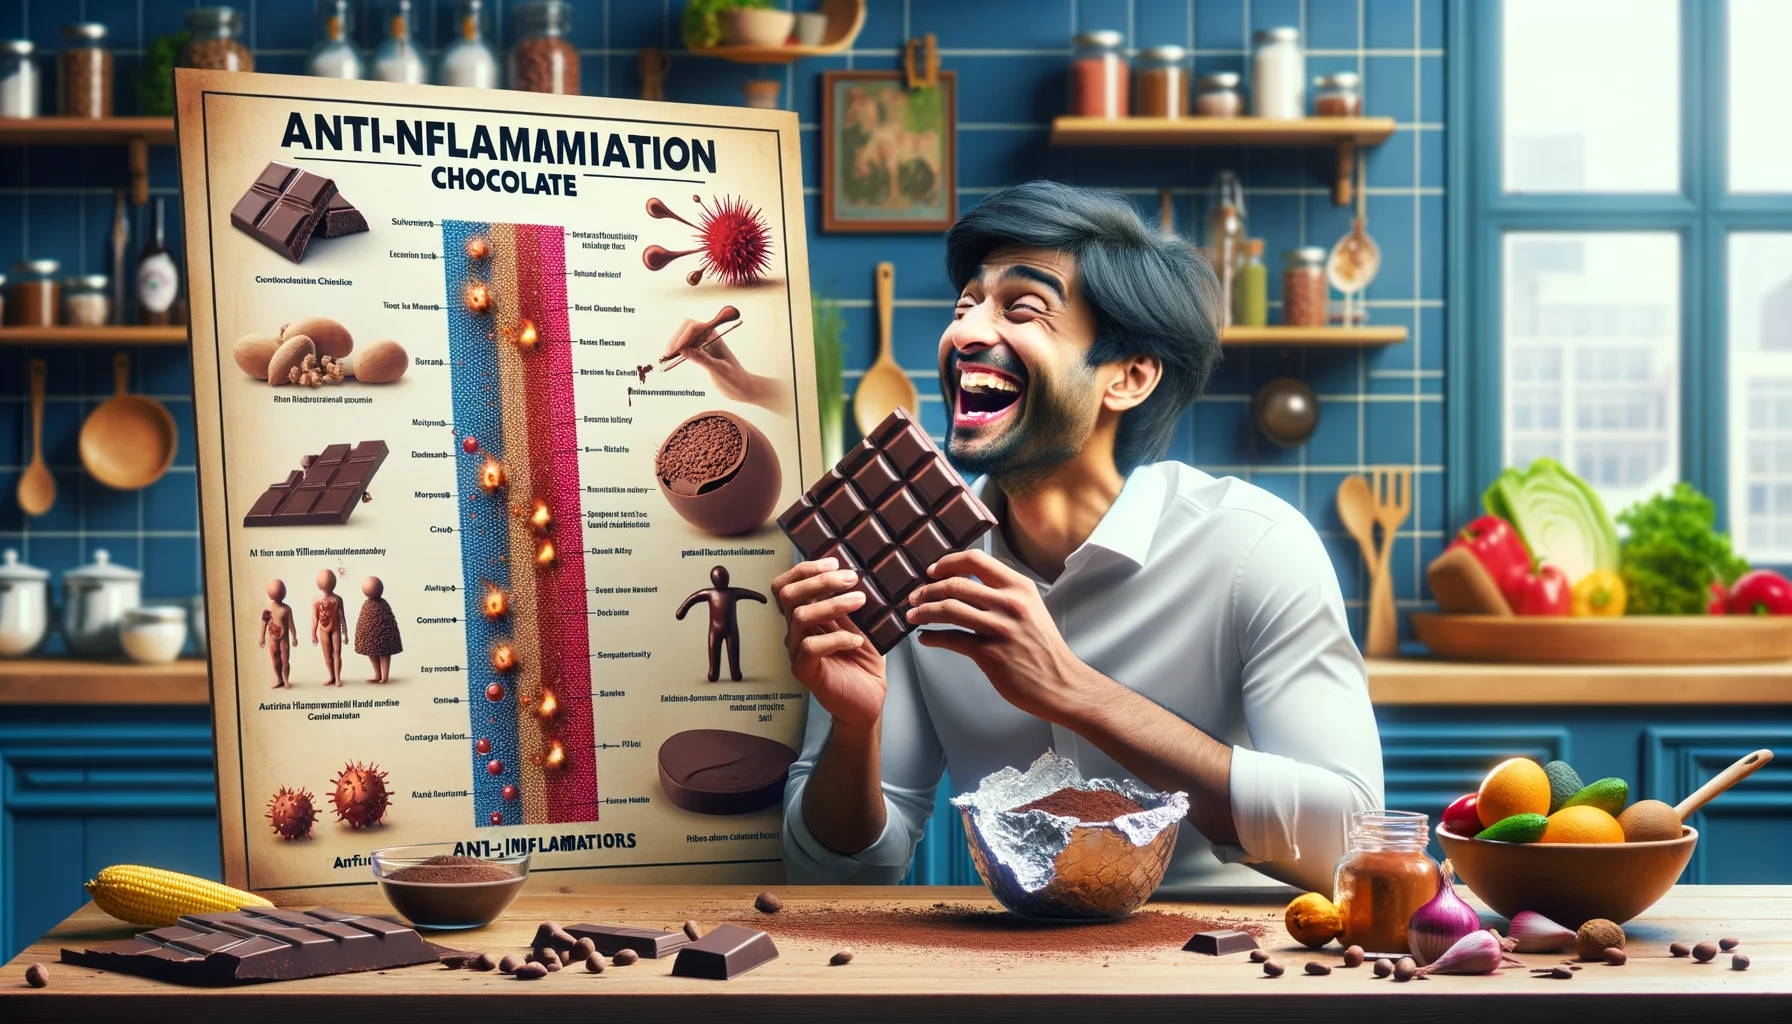 Imagine a humorous and realistic setting that showcases the benefits of anti-inflammatory chocolates. In this scene, a jovial South Asian male is seen thoroughly enjoying a rich and velvety anti-inflammatory chocolate. Beside him, there is an oversized, colorful chart showing various inflammation sources humorously being repelled by pieces of chocolate. The background is a bustling, homey kitchen full of nutritious ingredients. Hints of the theme are also subtly incorporated in the room's decor - with cocoa beans and tin foils scattered playfully. Remember to maintain a light-hearted and optimistic tone in the image.